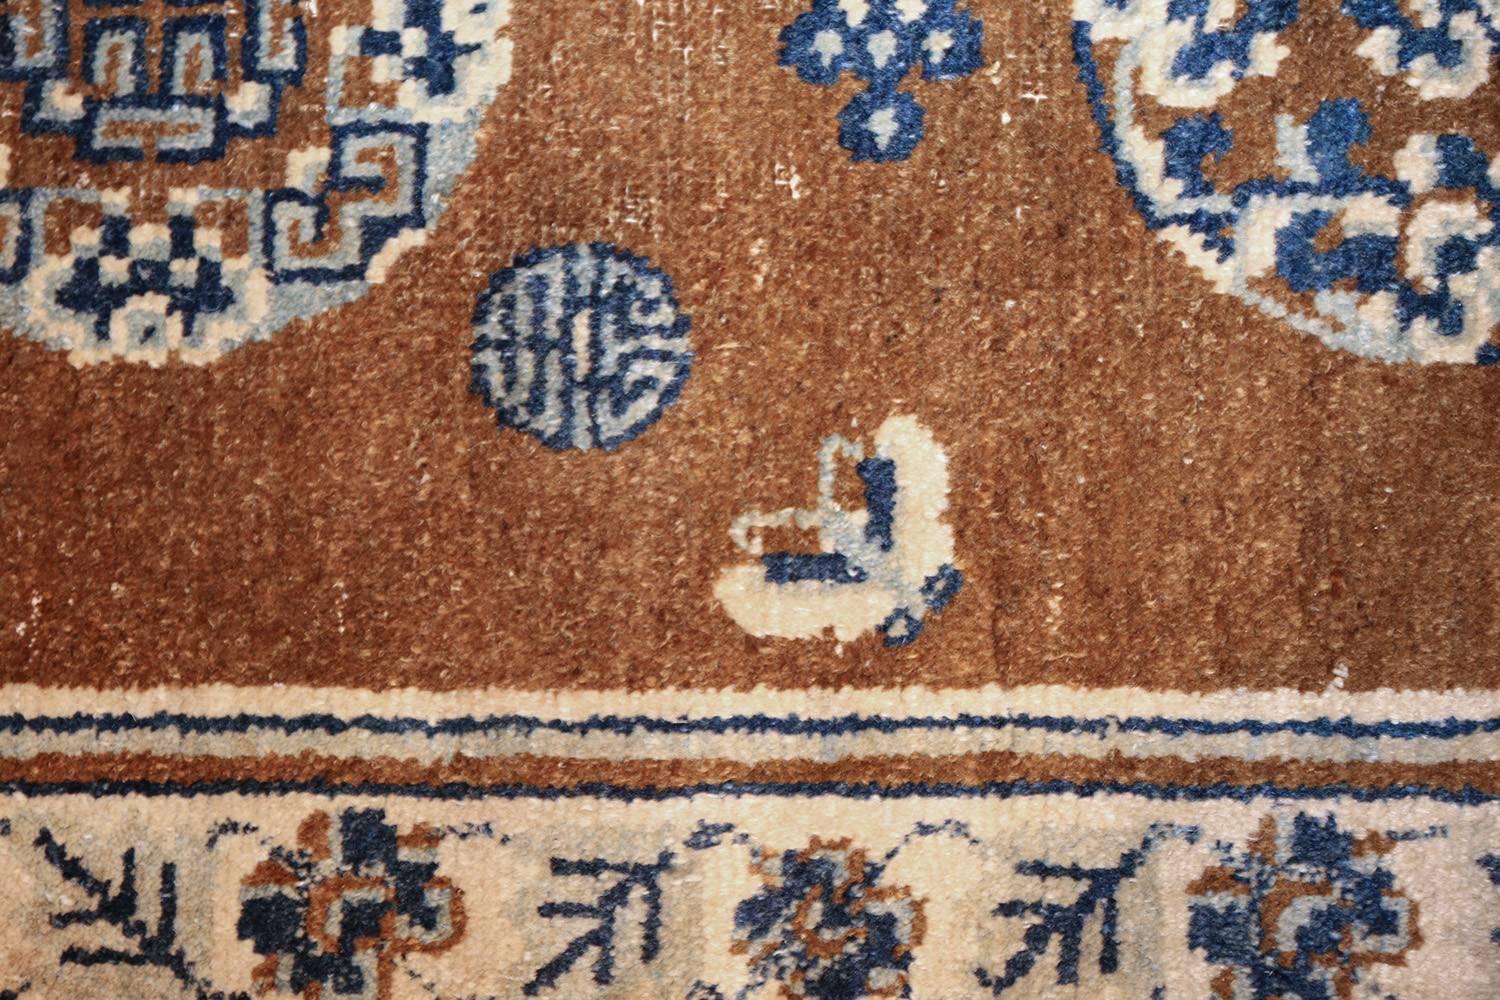 Hand-Knotted Small Size Antique Blue and Brown Chinese Rug